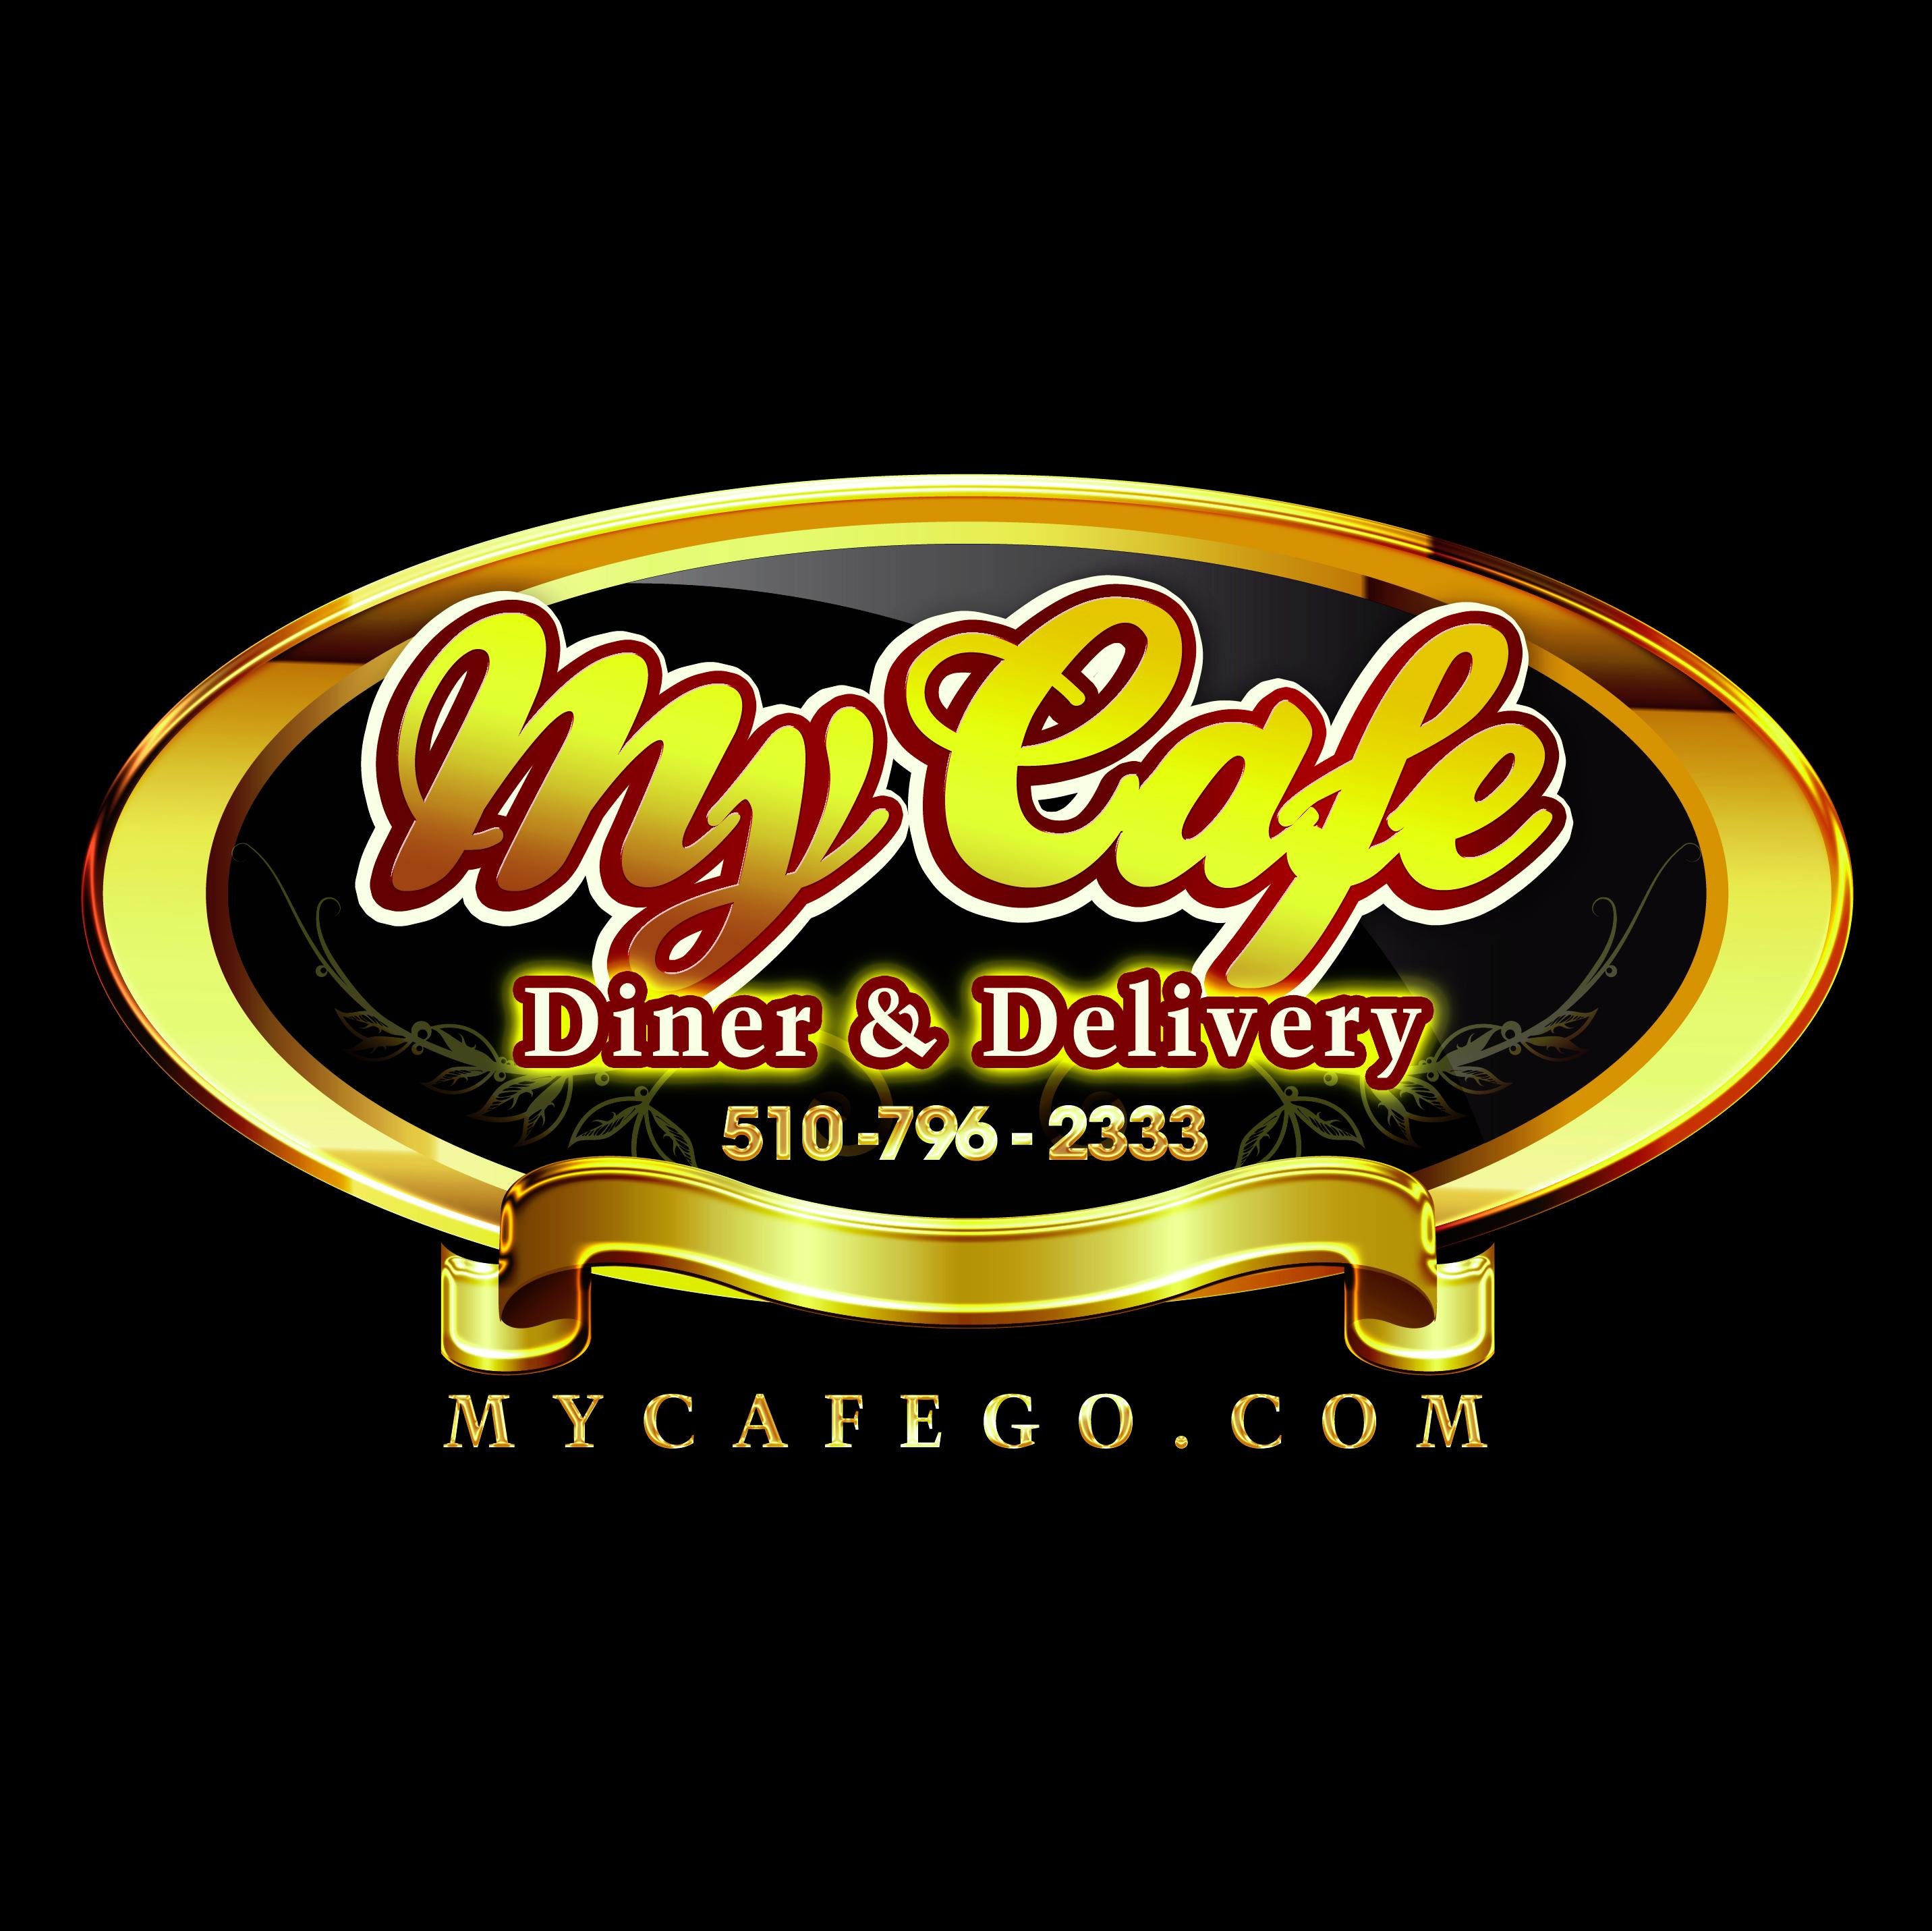 DELIVERING TO NEWARK/ FREMONT/ UNION CITY 9AM-9PM                                  5475 Thornton Ave Newark  Order Online or Call 510-796-2333